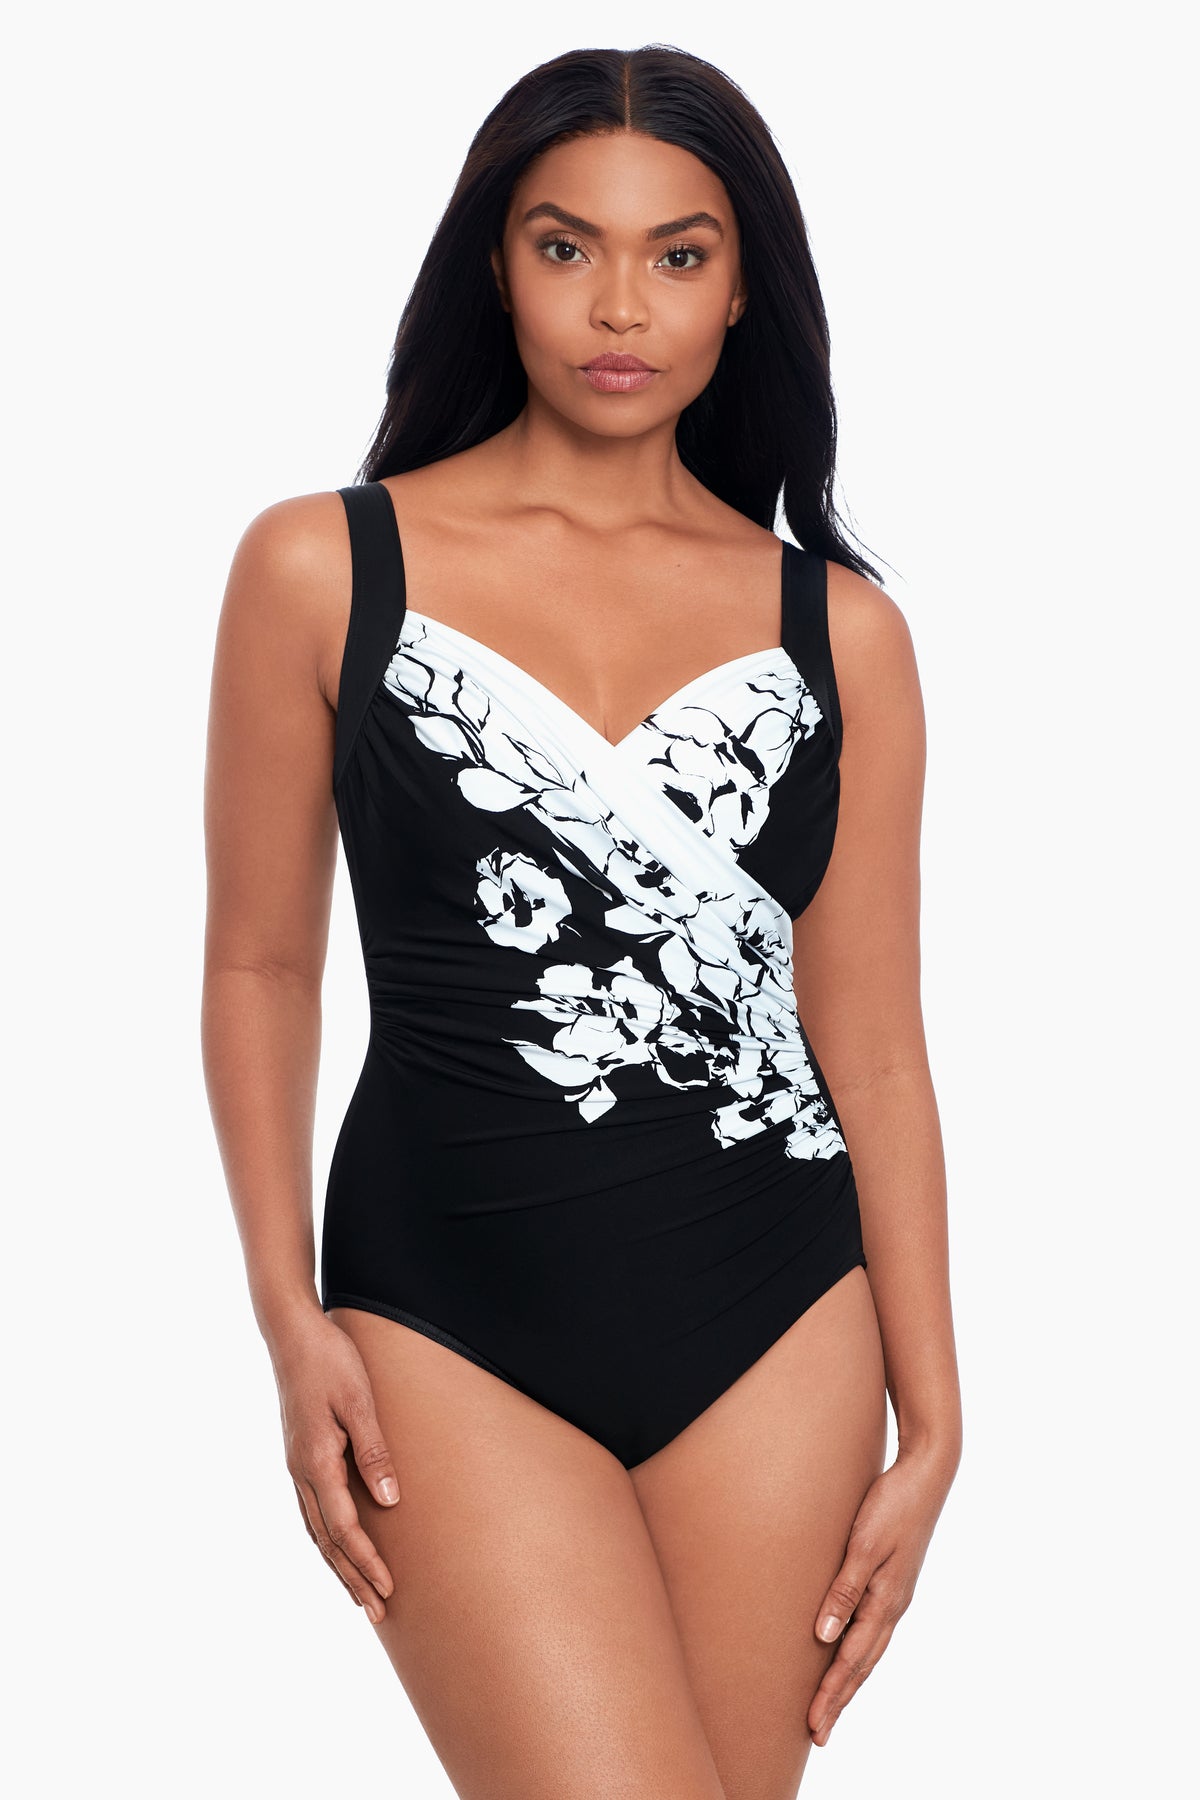 DreamShaper by Miracle Suit Daisy Mesh High Neck Tankini